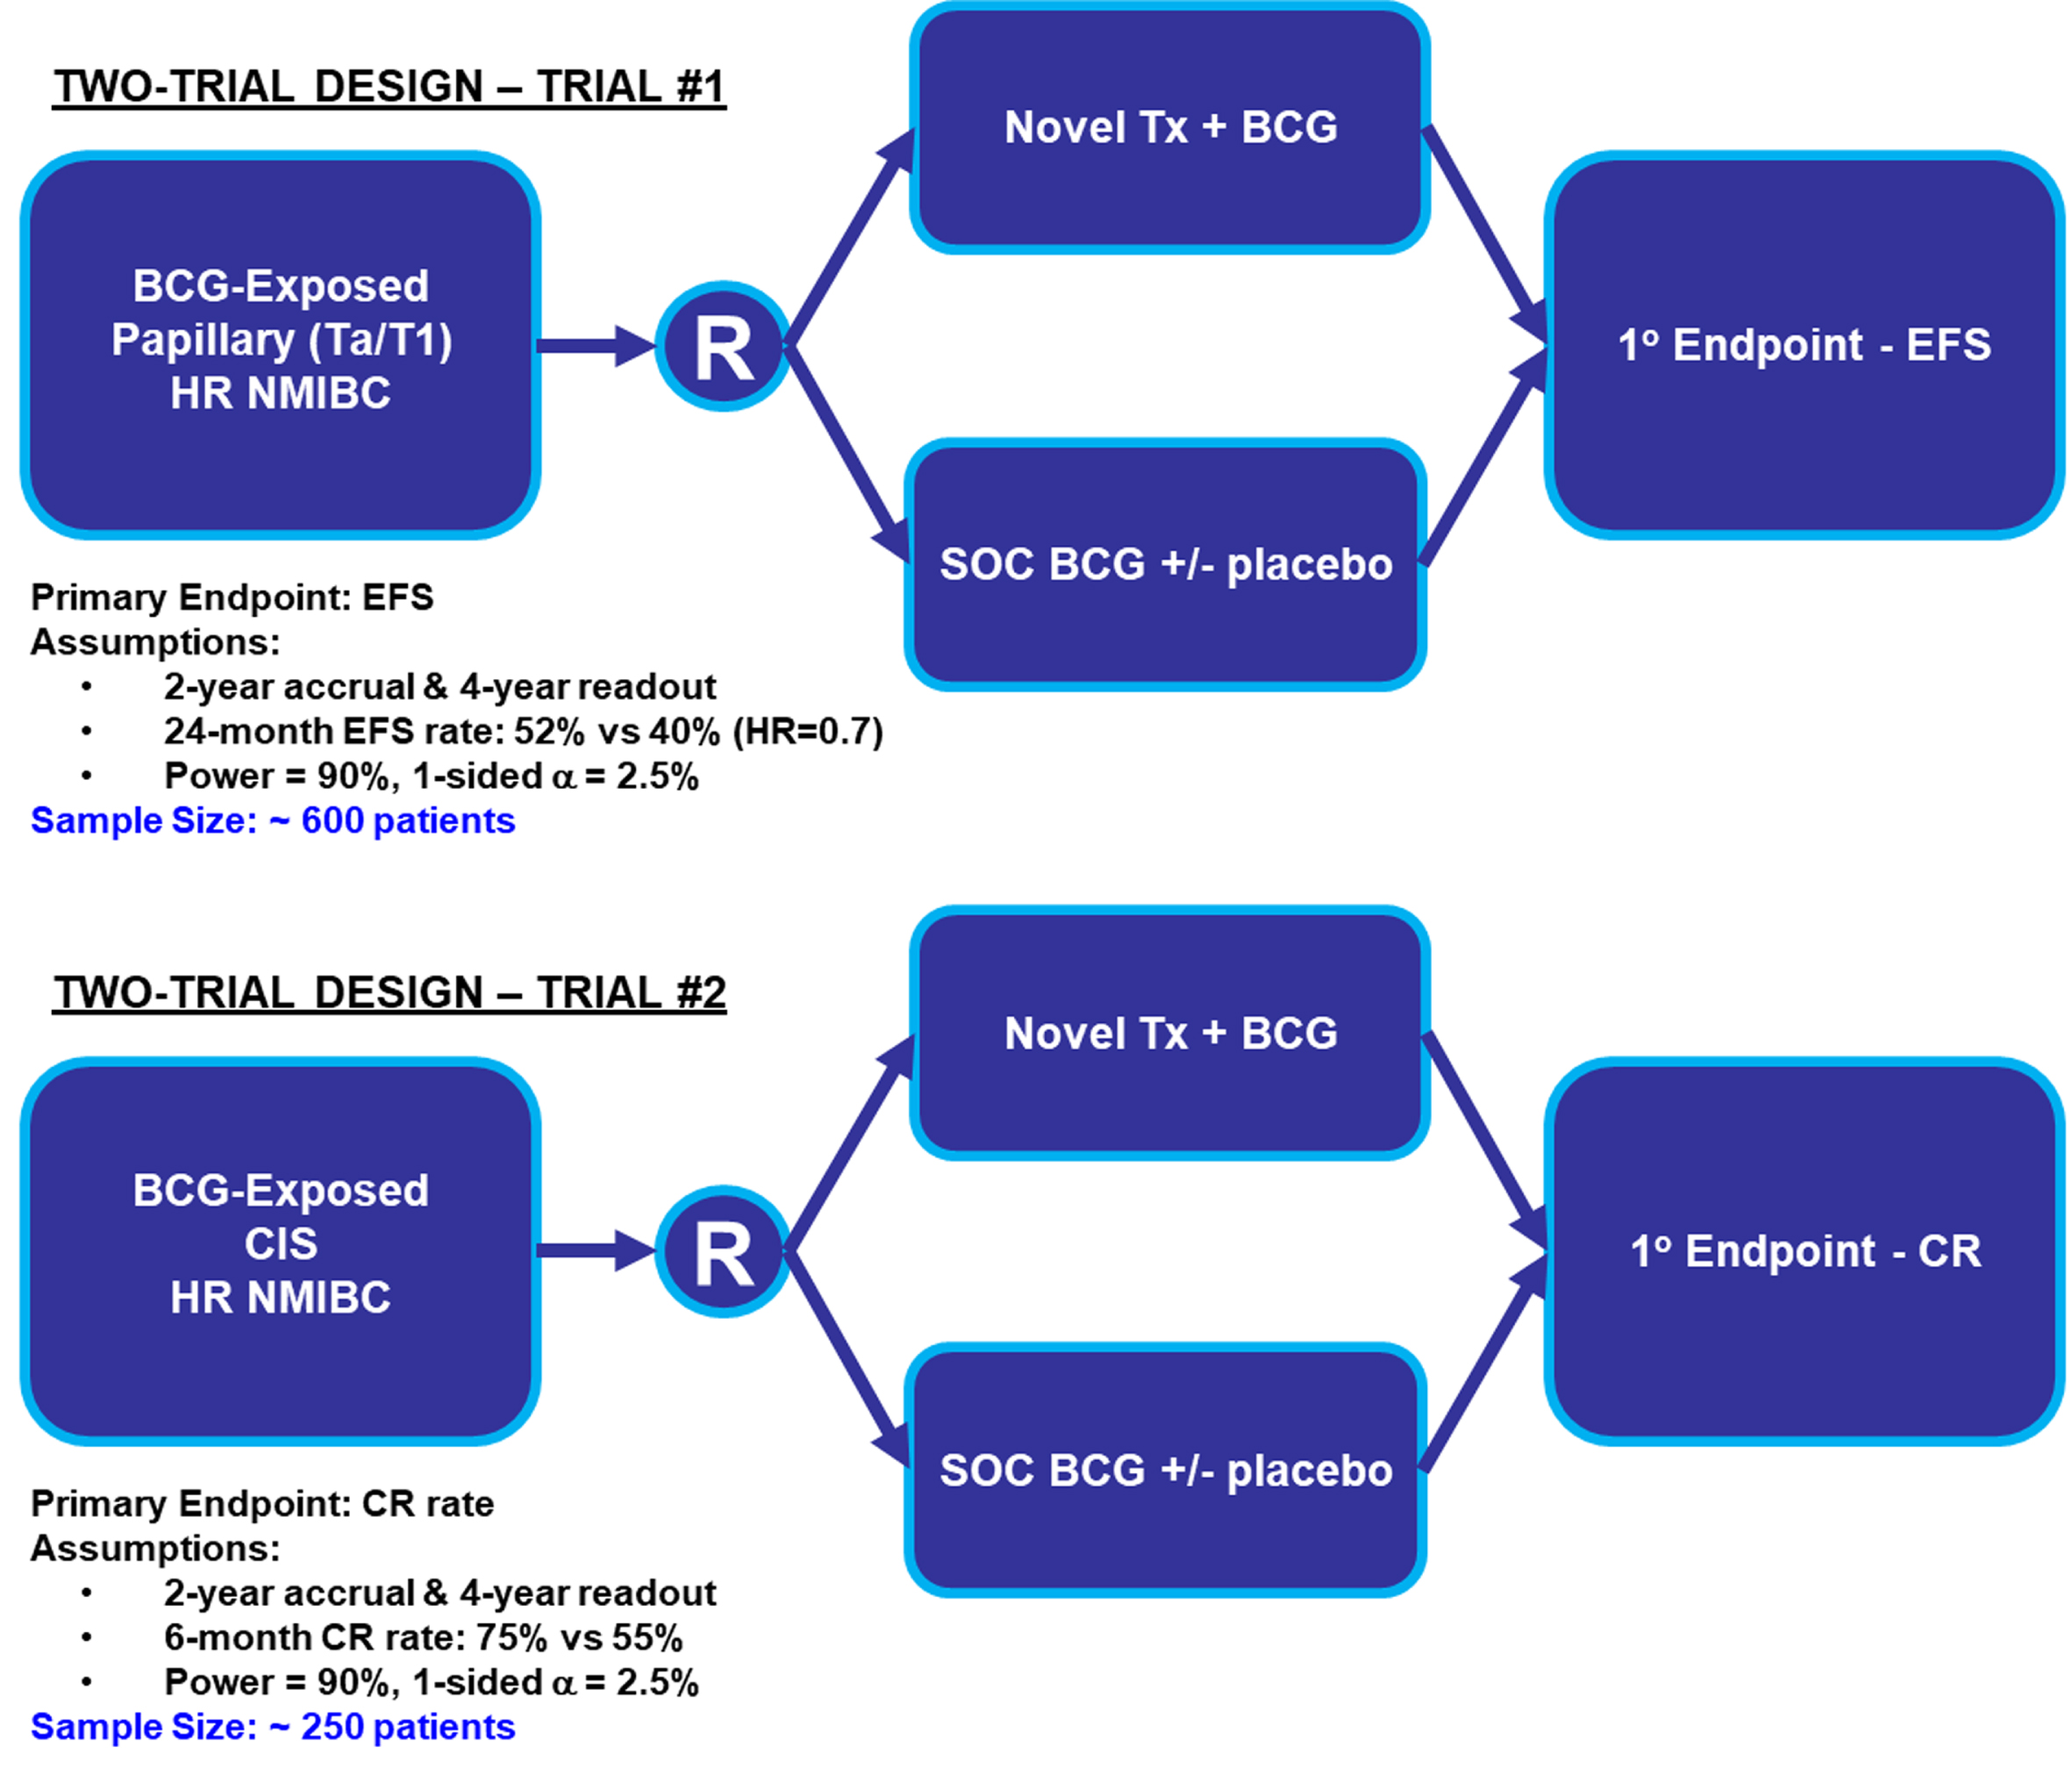 Two-Trial Design Simulation Investigating Papillary (Ta/T1) and CIS Patients Separately. Abbreviations: BCG: Bacillus Calmette-Guerin; CIS: carcinoma in situ; CR: complete response; EFS: event-free survival; HR NMIBC: high-risk non-muscle invasive bladder cancer; SOC: standard of care; Tx: treatment.